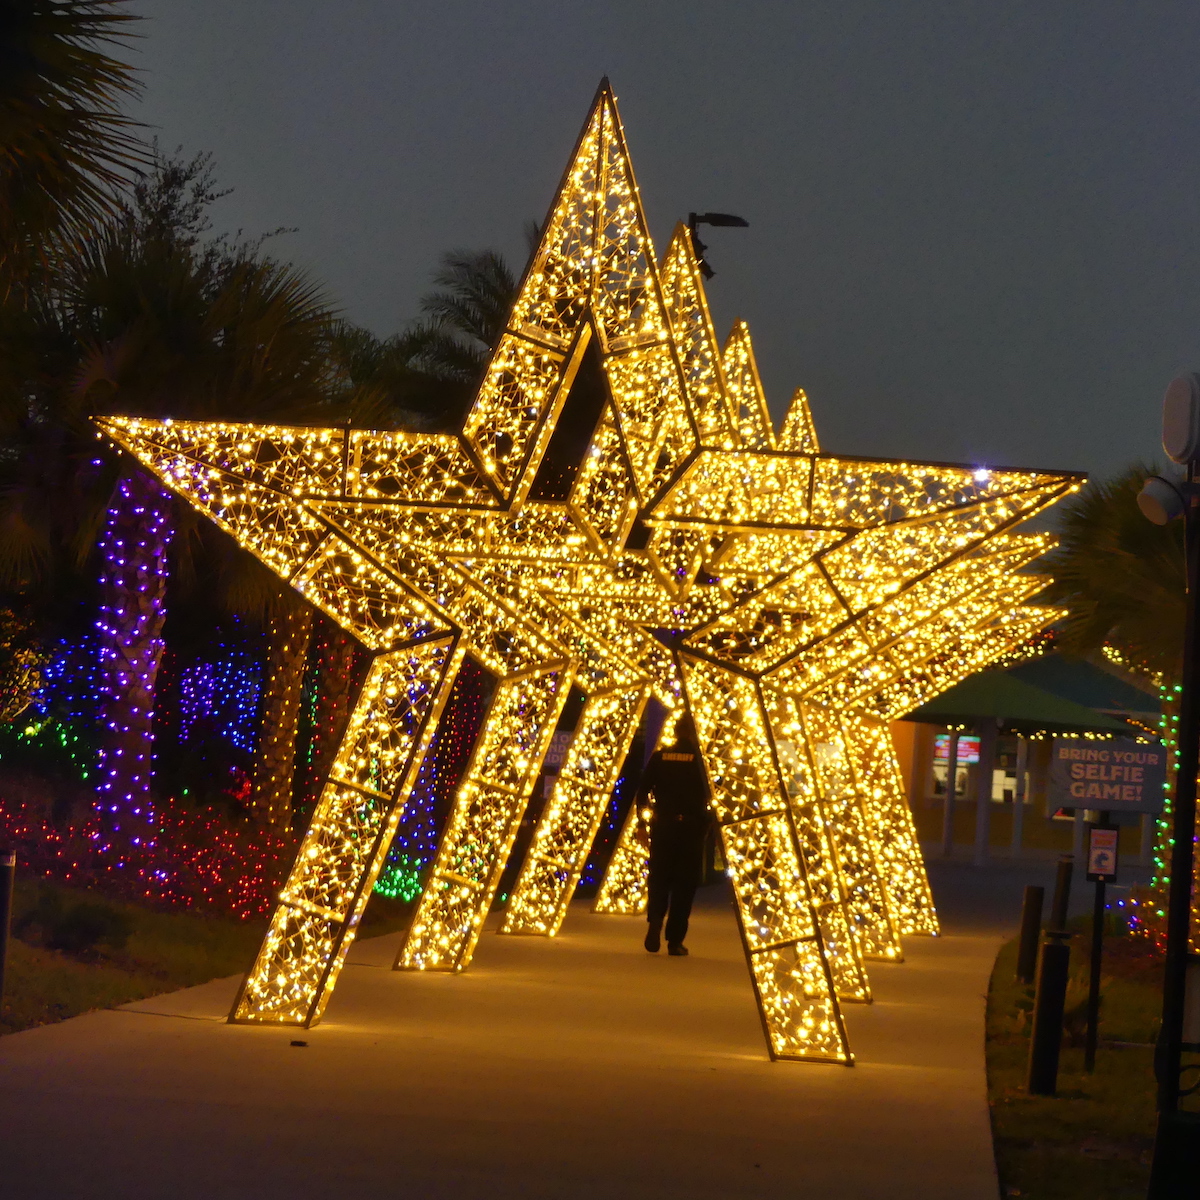 6 Festive Events Not To Miss In Kissimmee During the Holidays ...